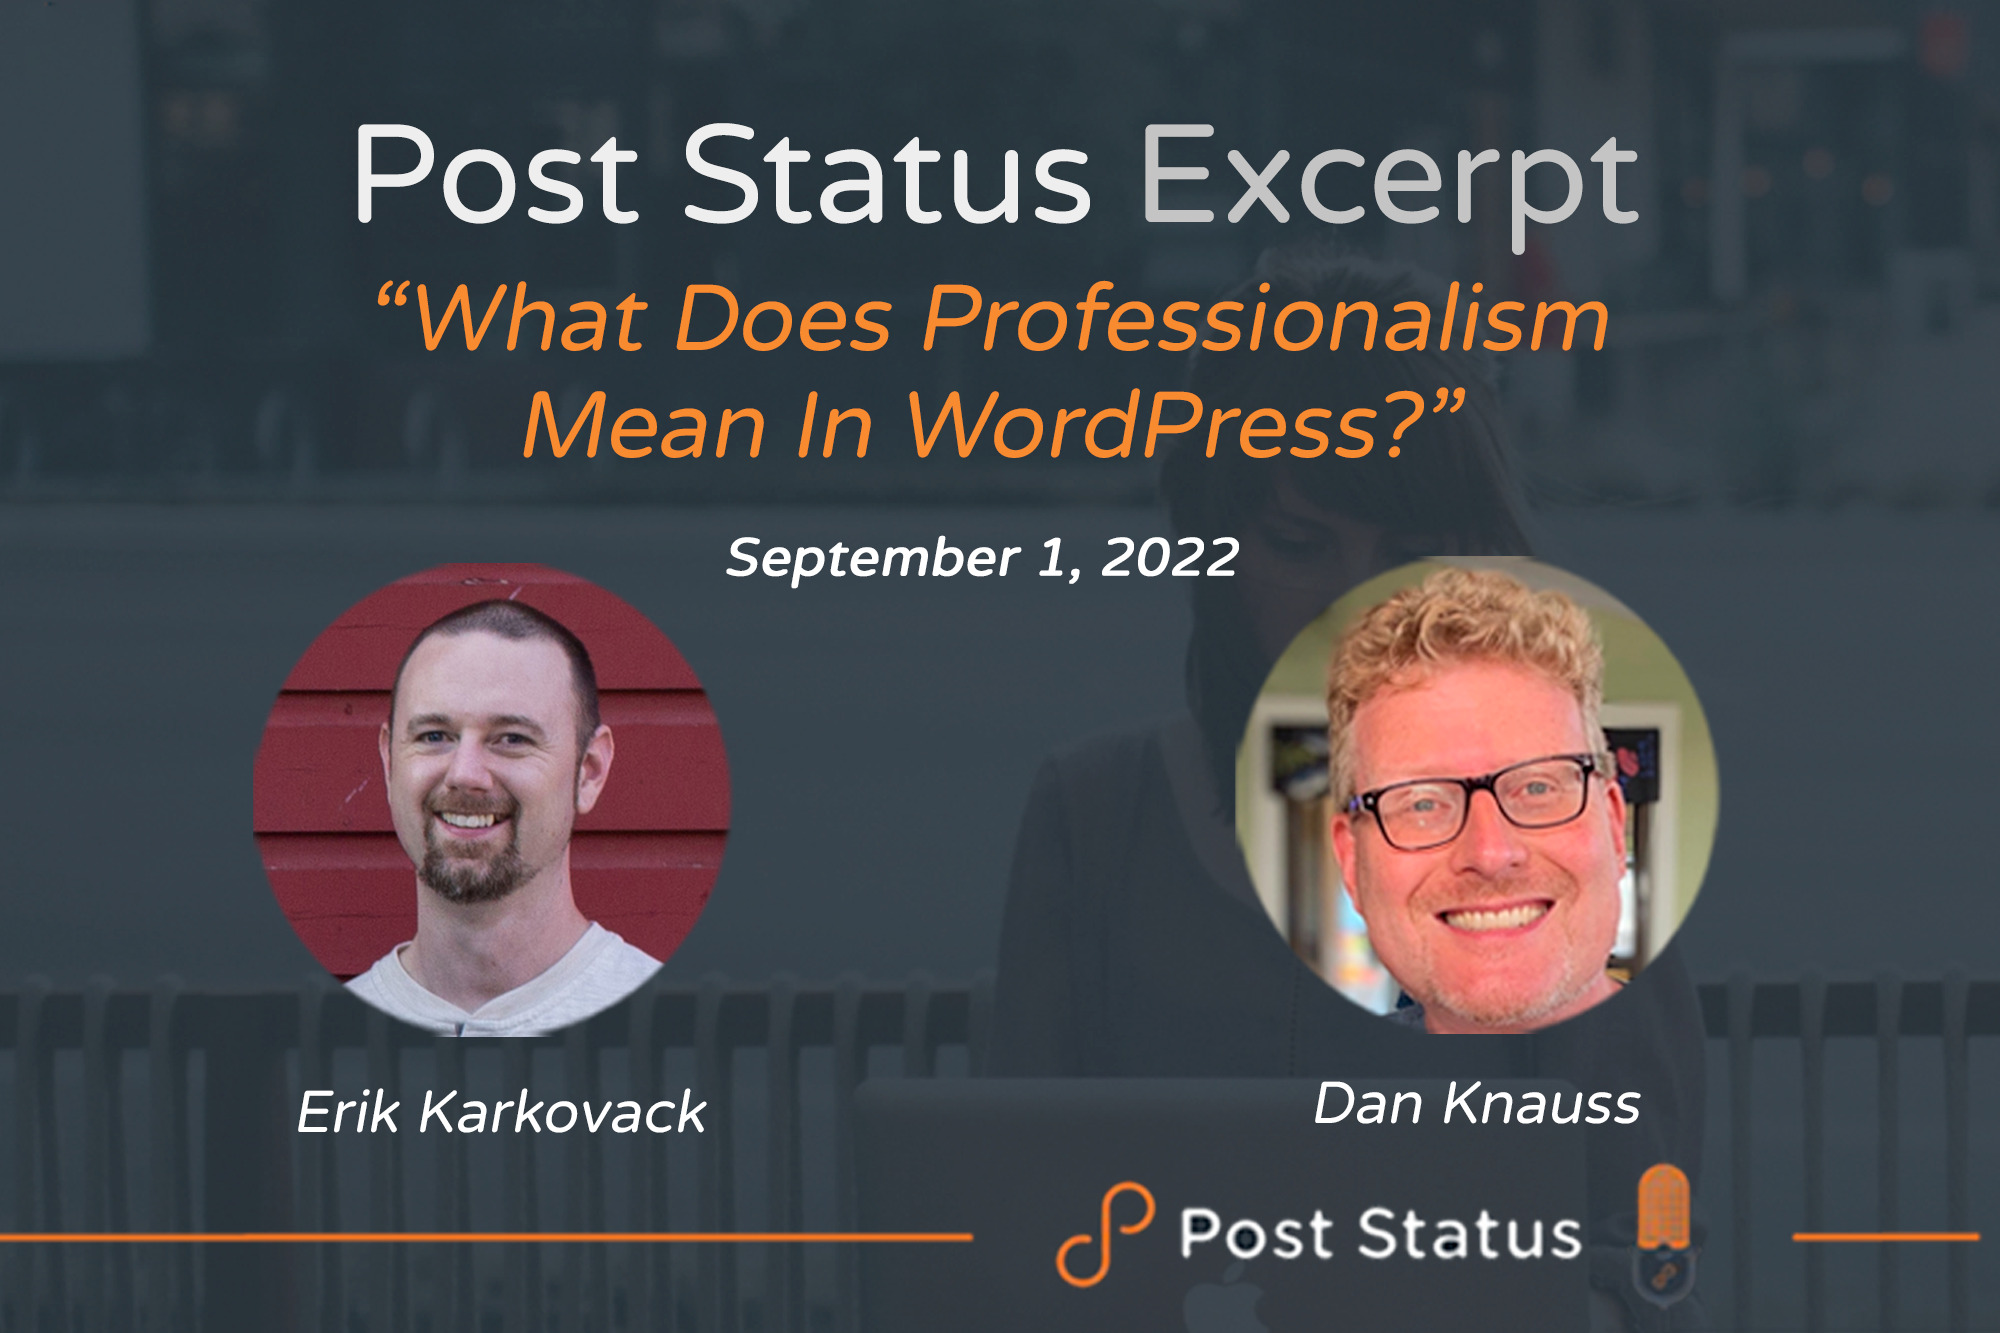 Post Status Excerpt (No. 67) — What Does Professionalism Mean in WordPress?